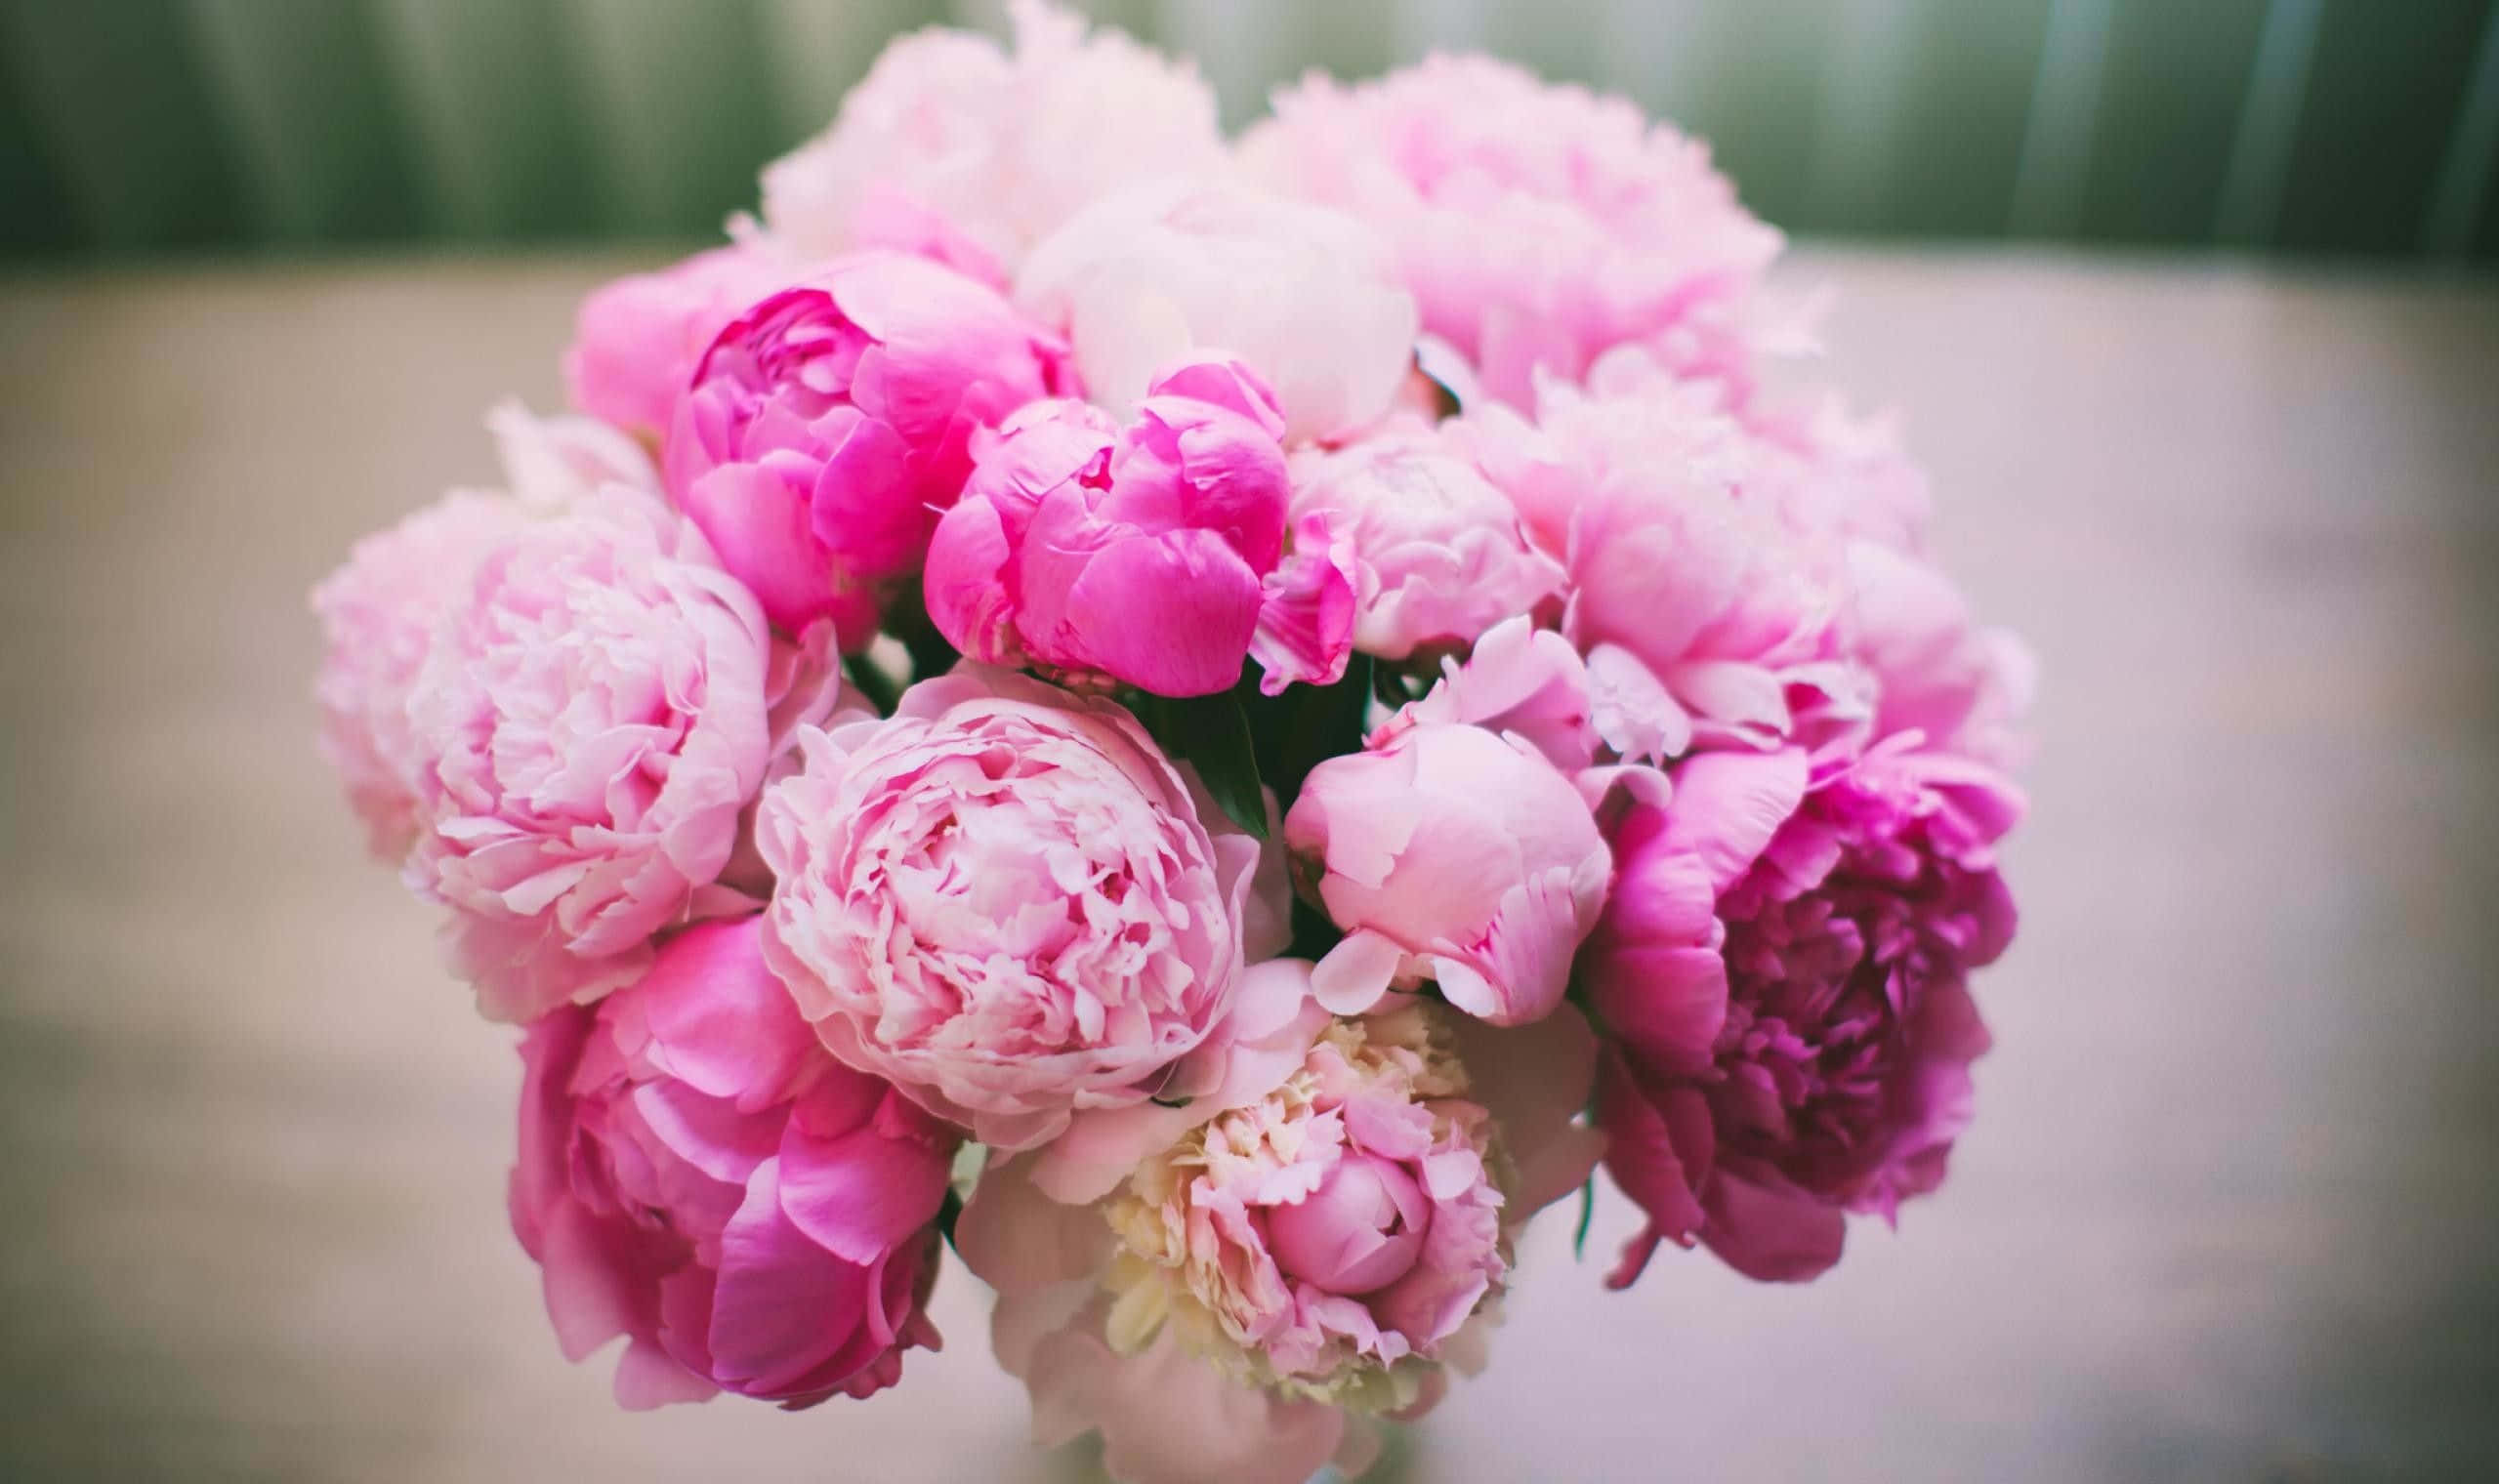 Pink Peonies In A Vase On A Wooden Table